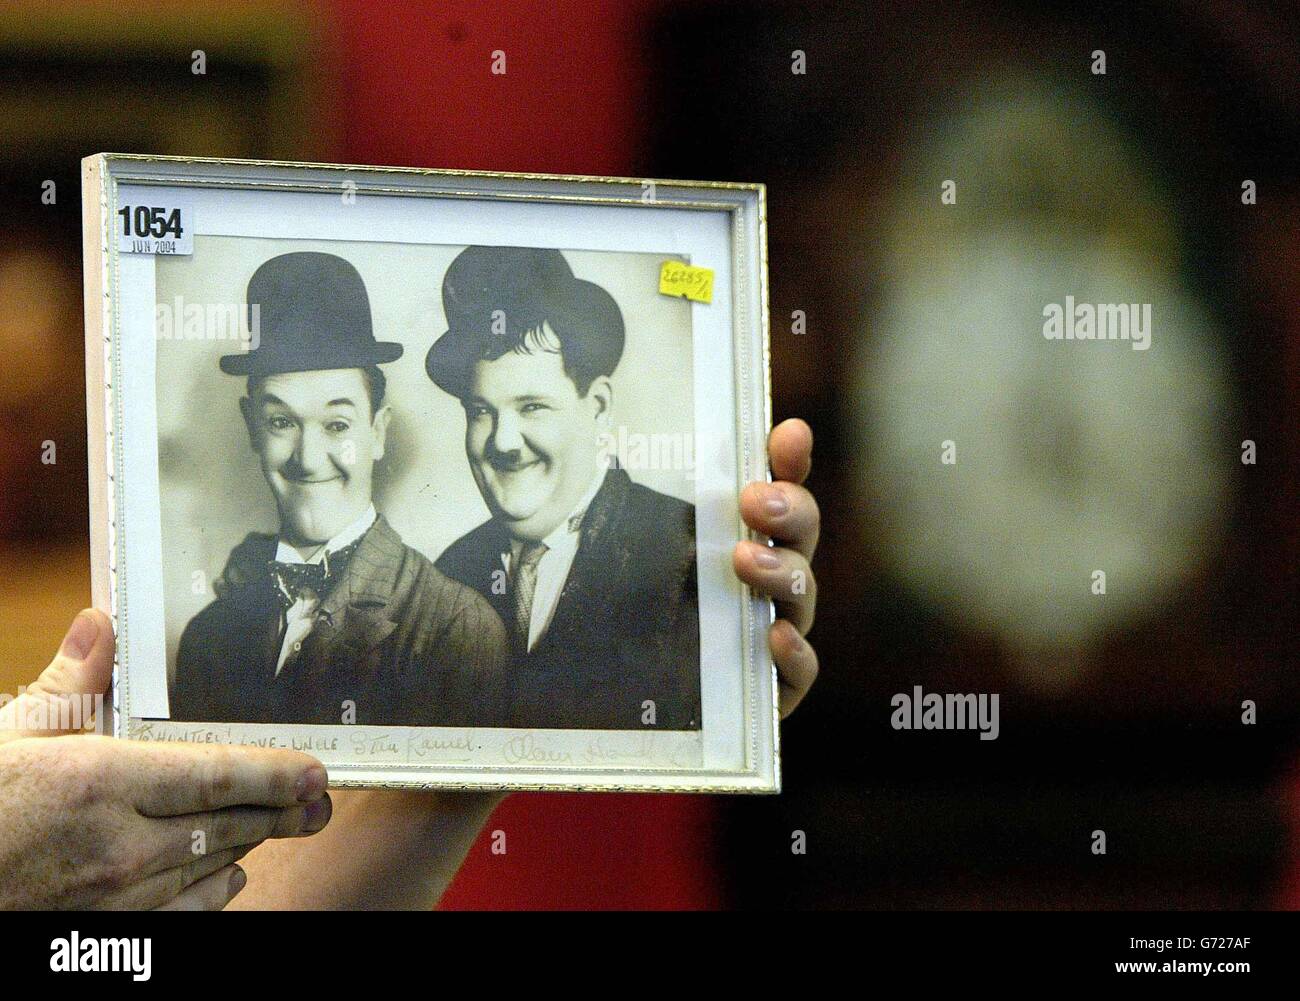 A collection of rare and unsean pictures of Stan Laurel family Memorabilla went under the hammer at Anderson and Garland in Newcastle where there pictures totalled over 20,000. The picture shown here is a framed picture of Stan Laurel and Oliver Hardy, signed by Oliver Hardy 'To Huntley ! Love - Uncle Stan Laurel'. Stock Photo